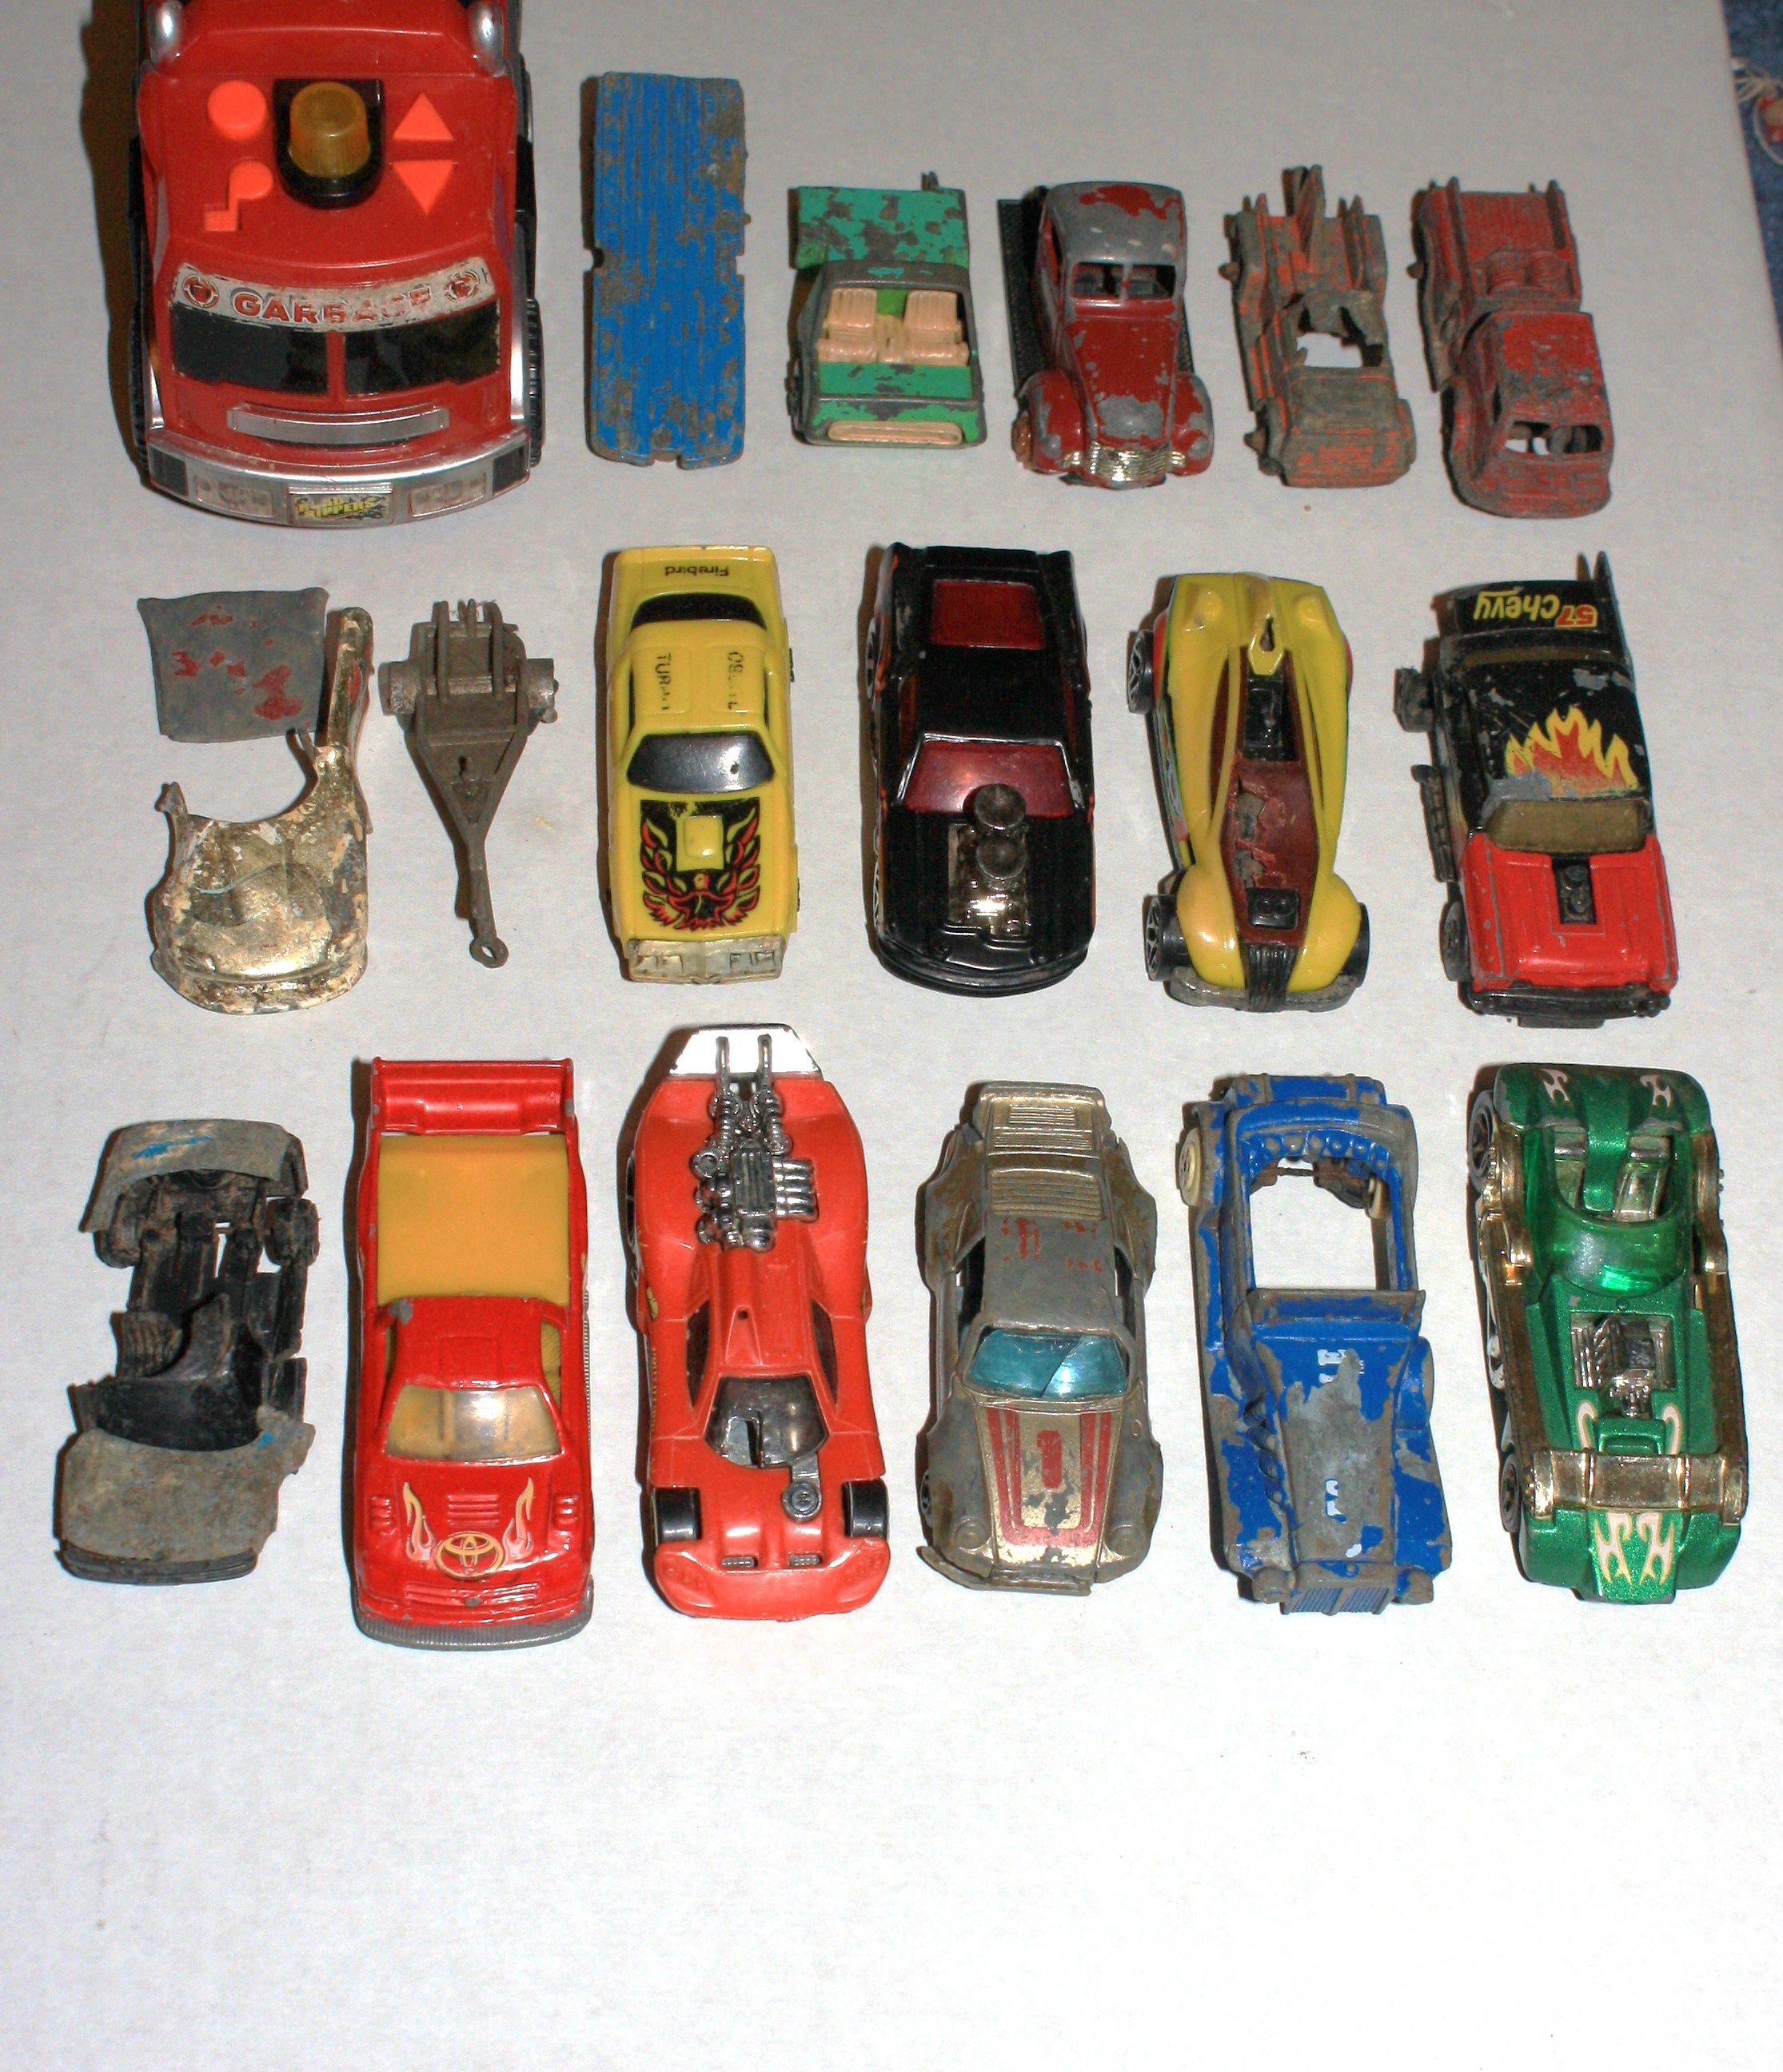 IMG 2234 The toy car junkyard lol.  The two trucks in the back row upper right, a tow truck and a pumper are both Tootsie Toys of Chicago.  They also 